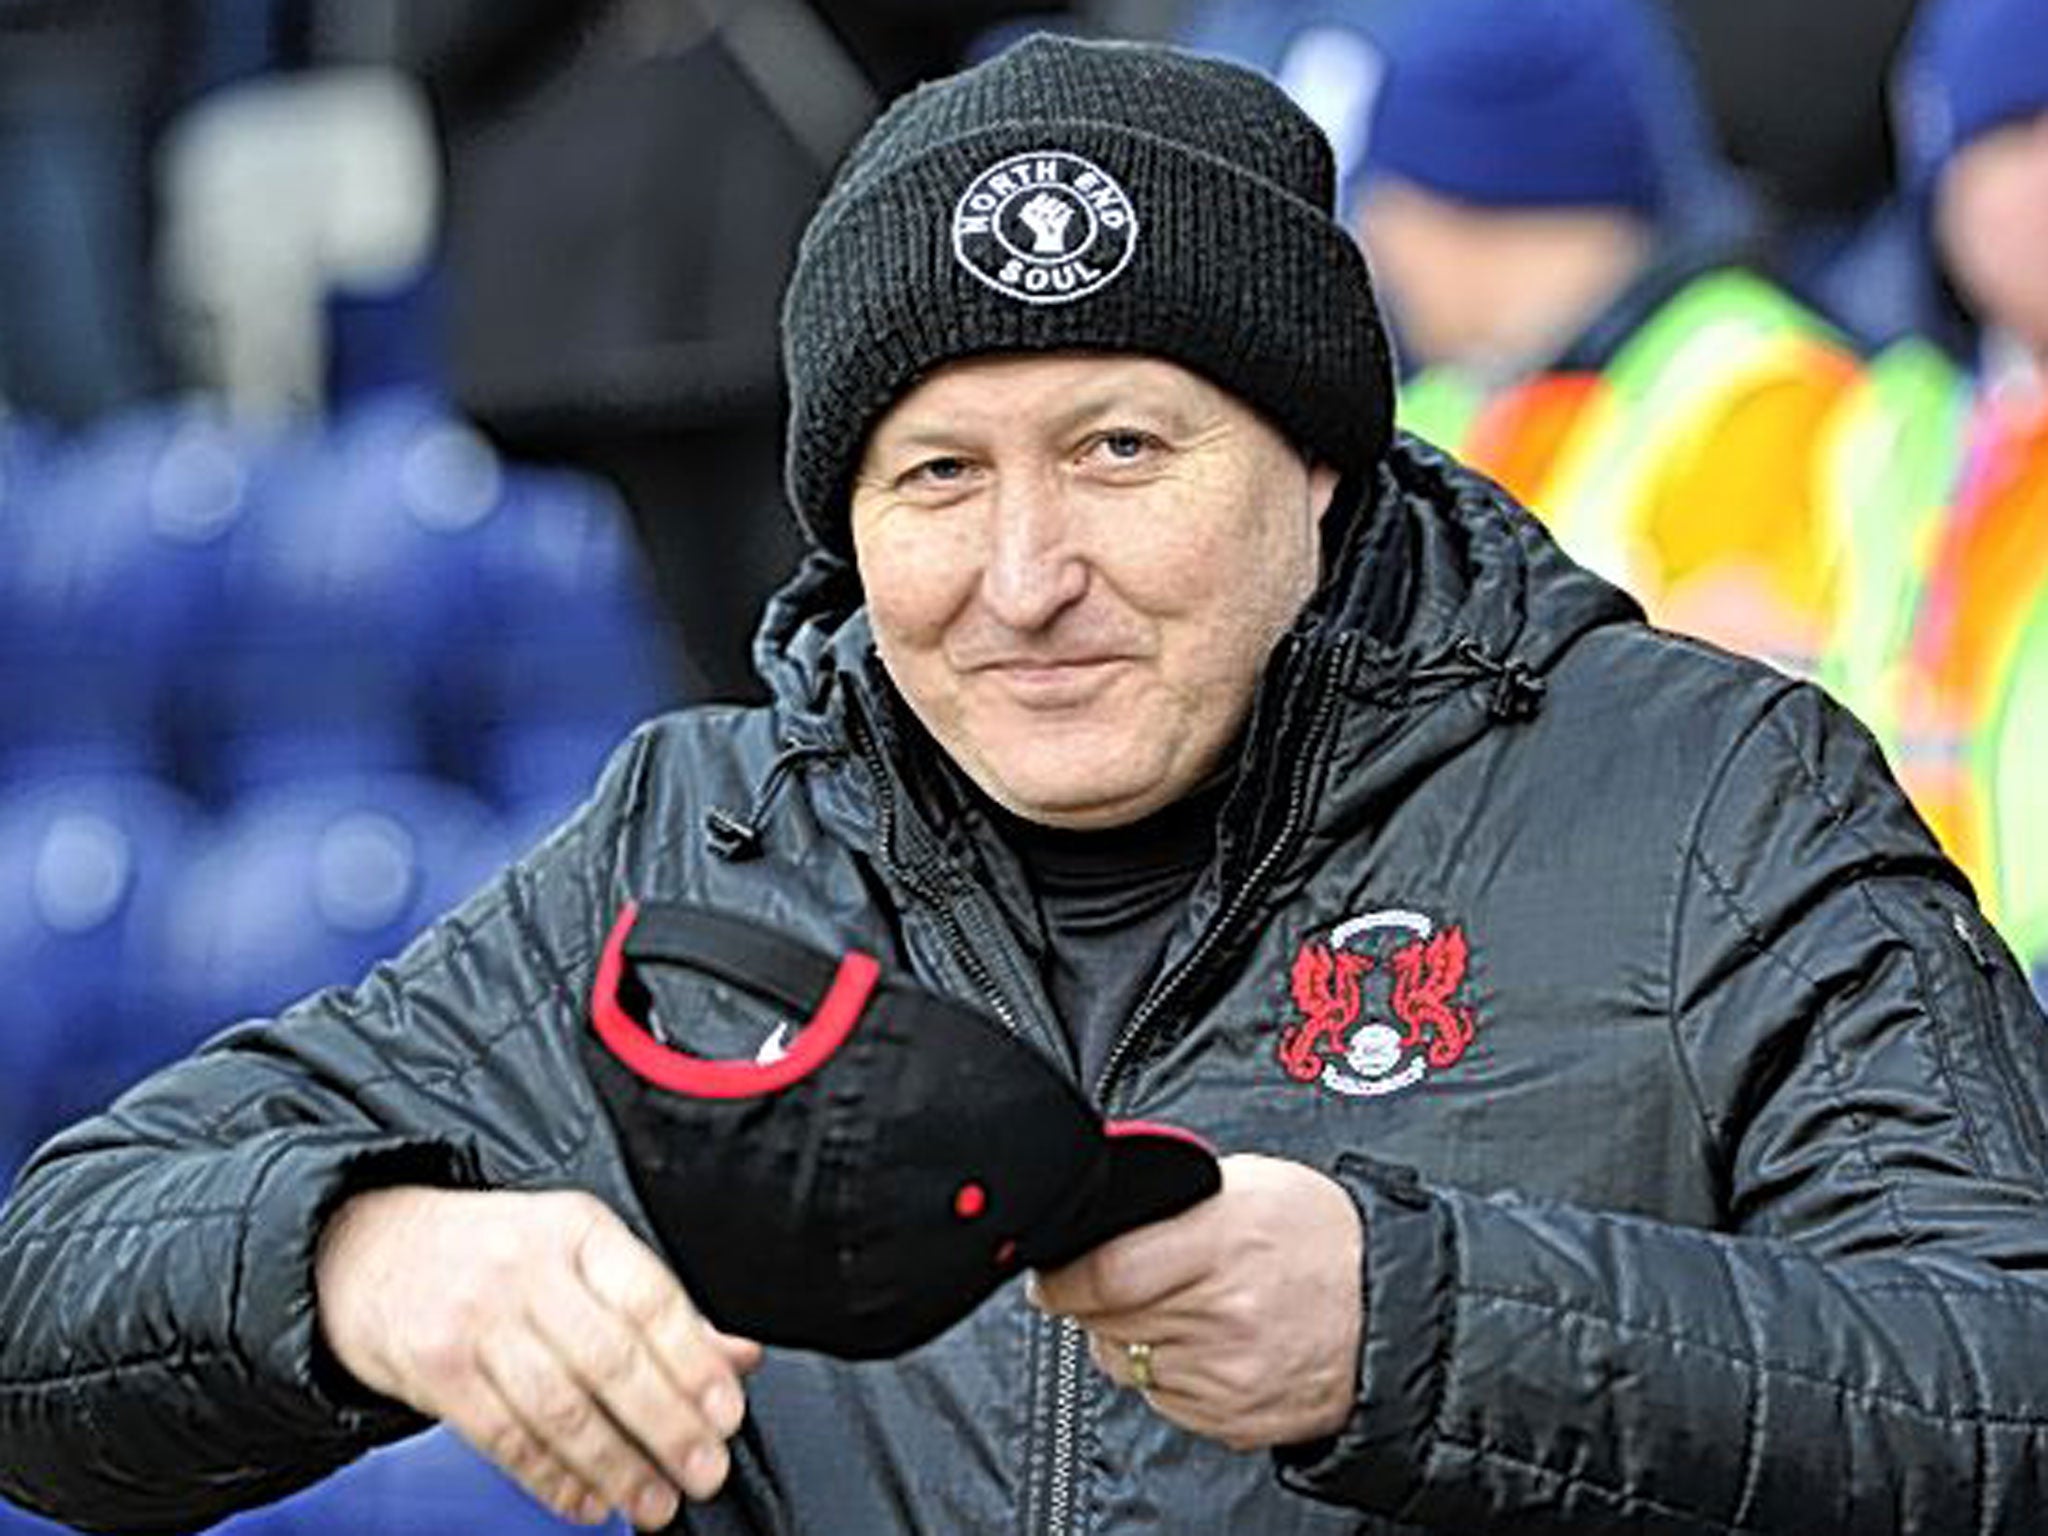 Russell Slade’s powers of motivation helped get Leyton Orient back on track after a recent wobble